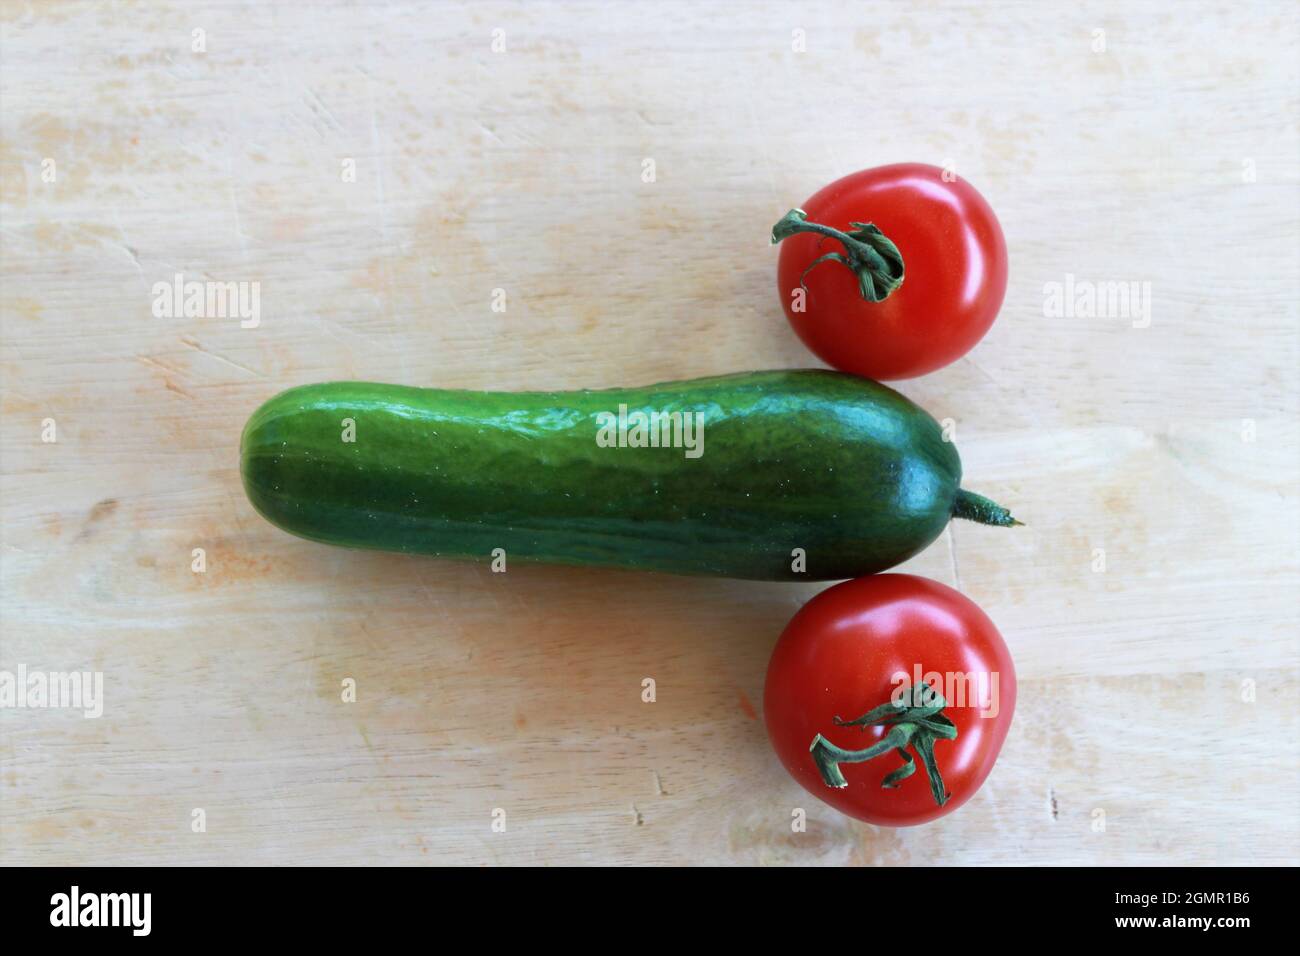 Vegetables in the form of cucumbers and tomatoes  symbolize Stock Photo